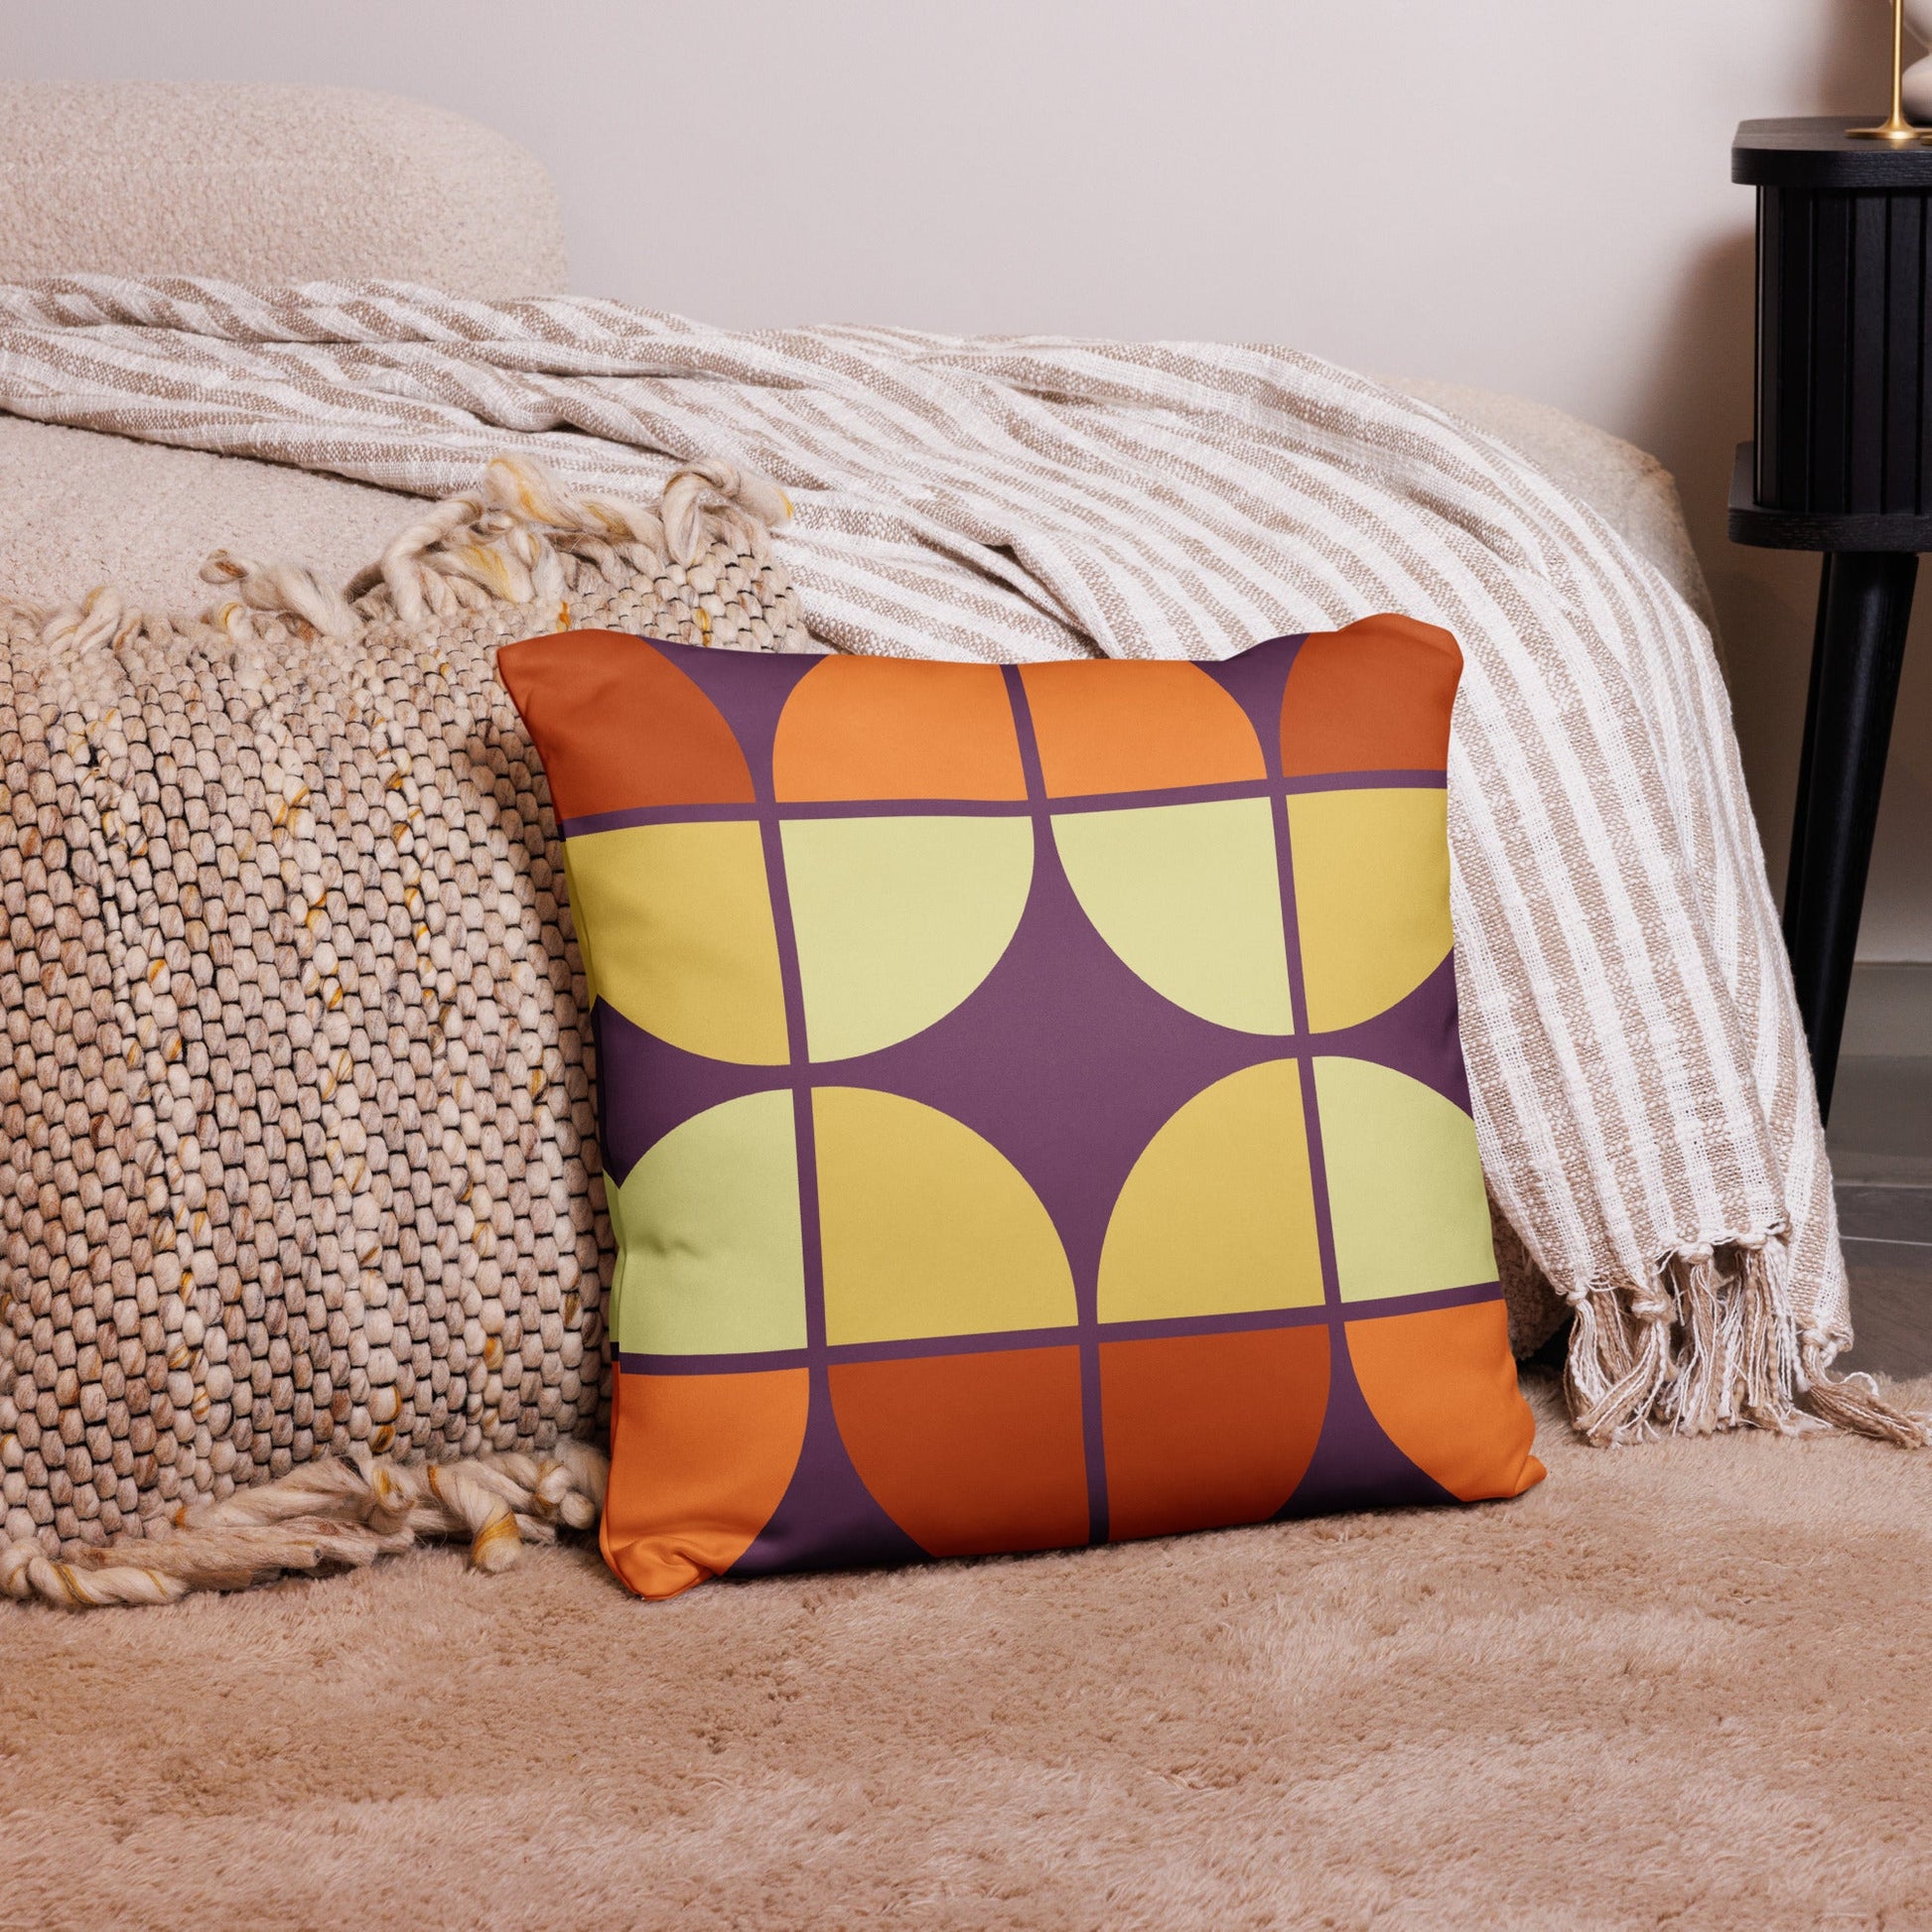 Vibrant Pillow - Brighten Your Space with Colorful Comfort